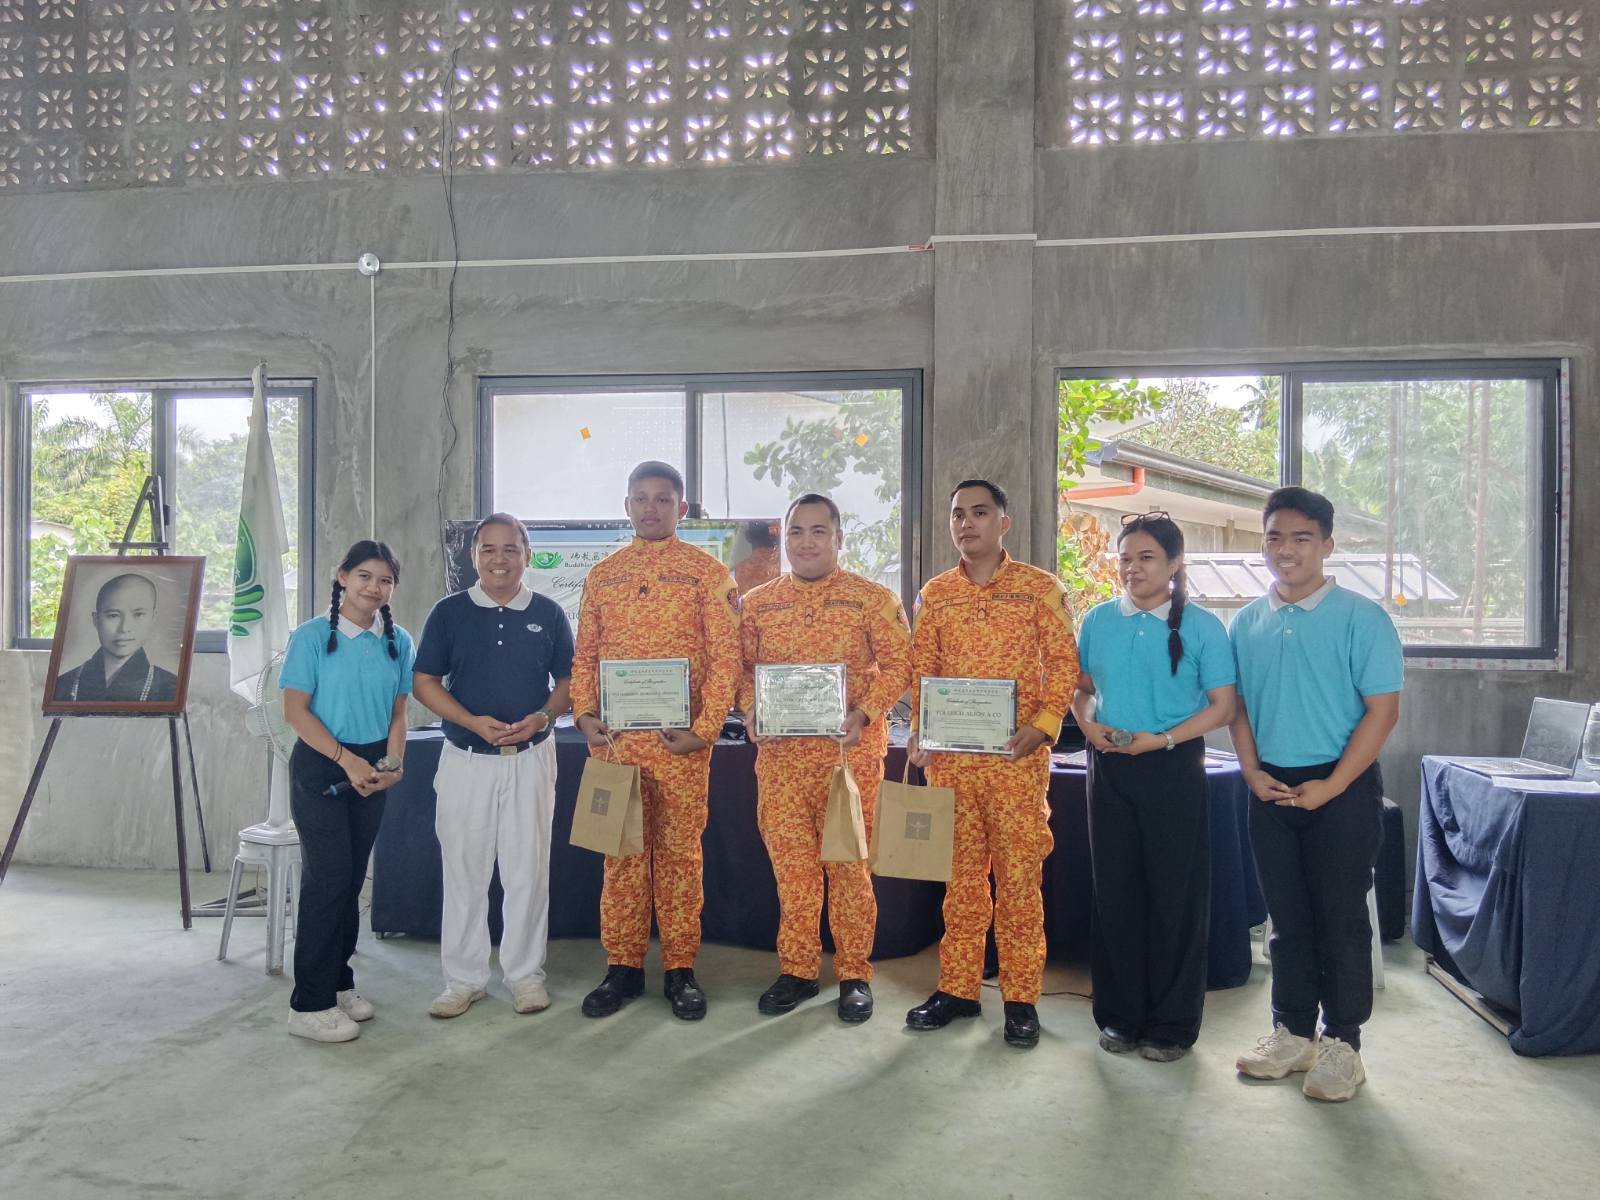 Bureau of Fire Protection Palo officers FO3 Marrion Jeordan Pedrosa, FO1 Leigh Aljon Co, and FO1 Rainier Cyril Pelingon receive certificates of recognition for conducting a lecture and simulated fire emergency scenario for Tzu Chi Palo’s sixth Humanity Class. 【Photo by Tzu Chi Palo】